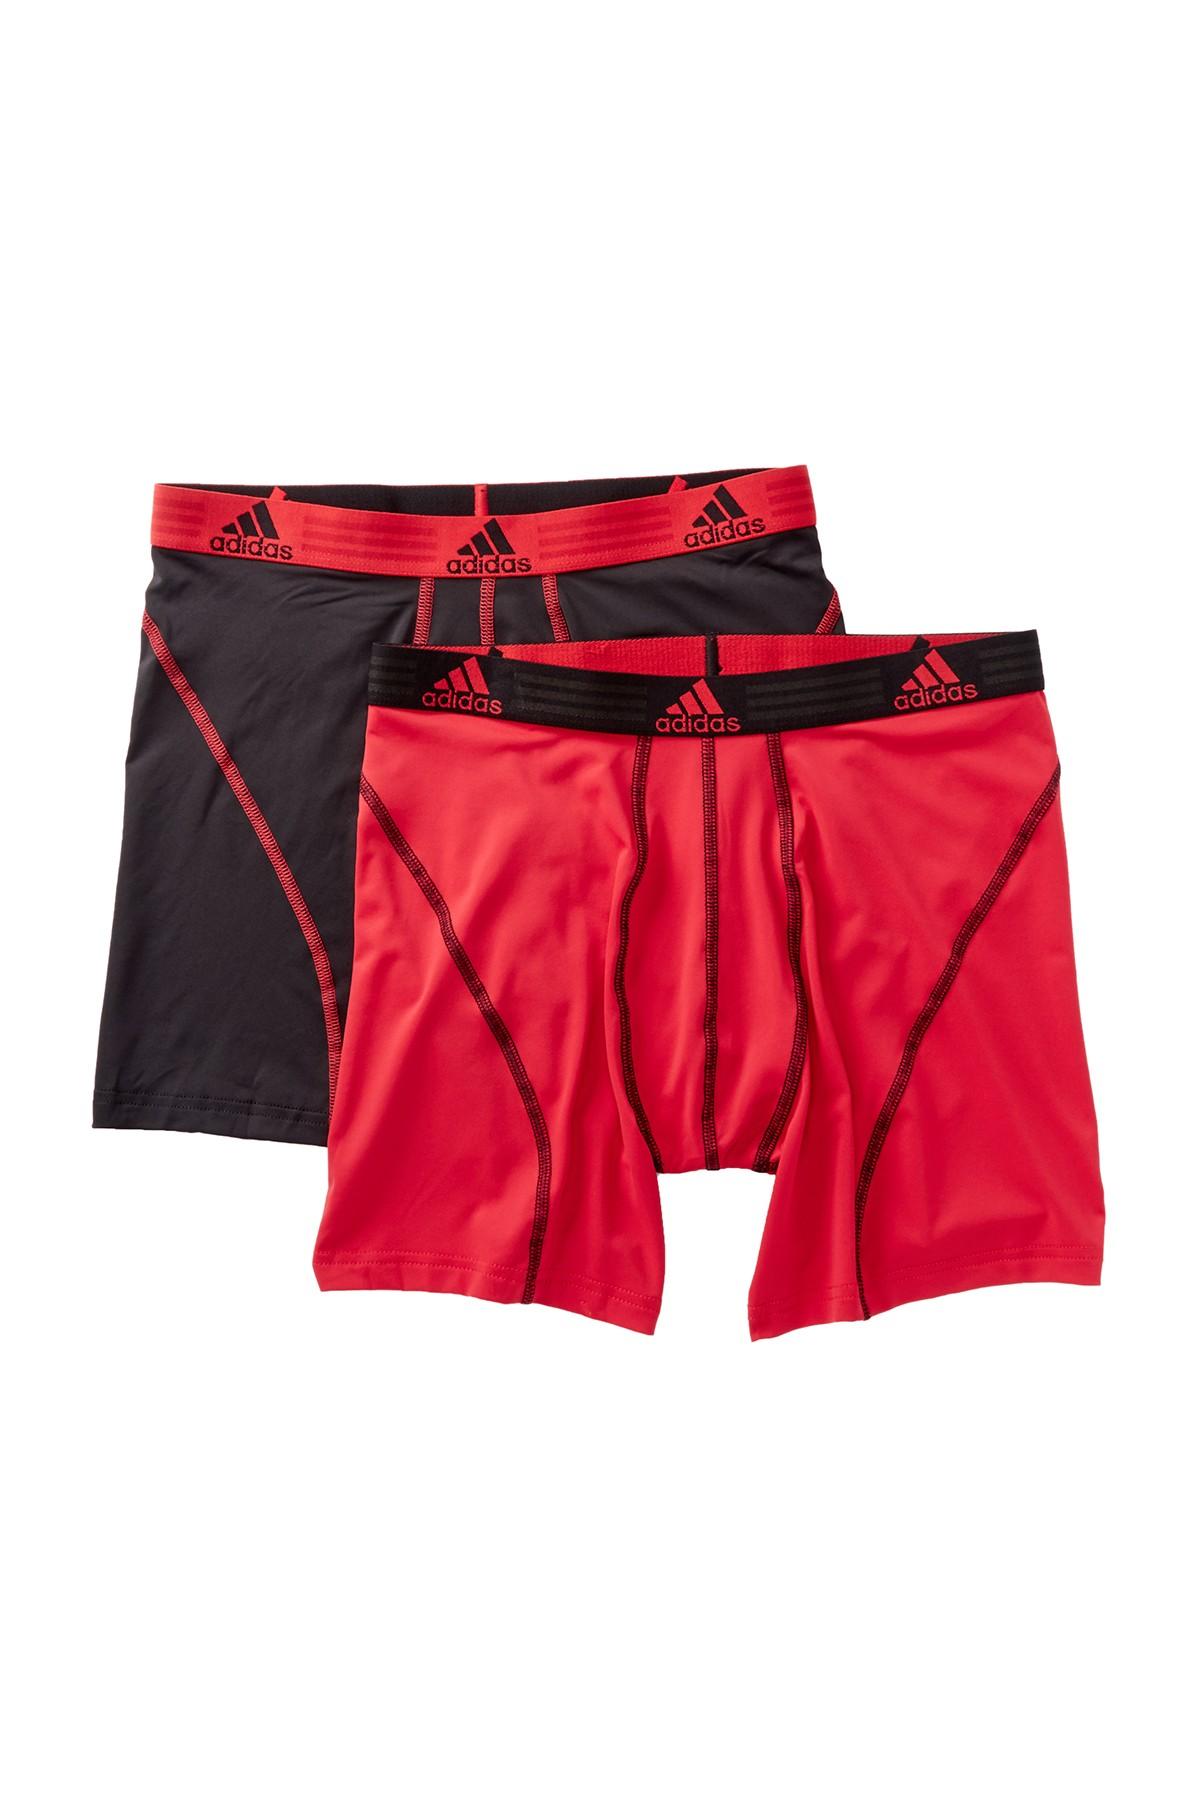 adidas Synthetic Climalite Performance Boxer Brief - Pack Of 2 in Red ...